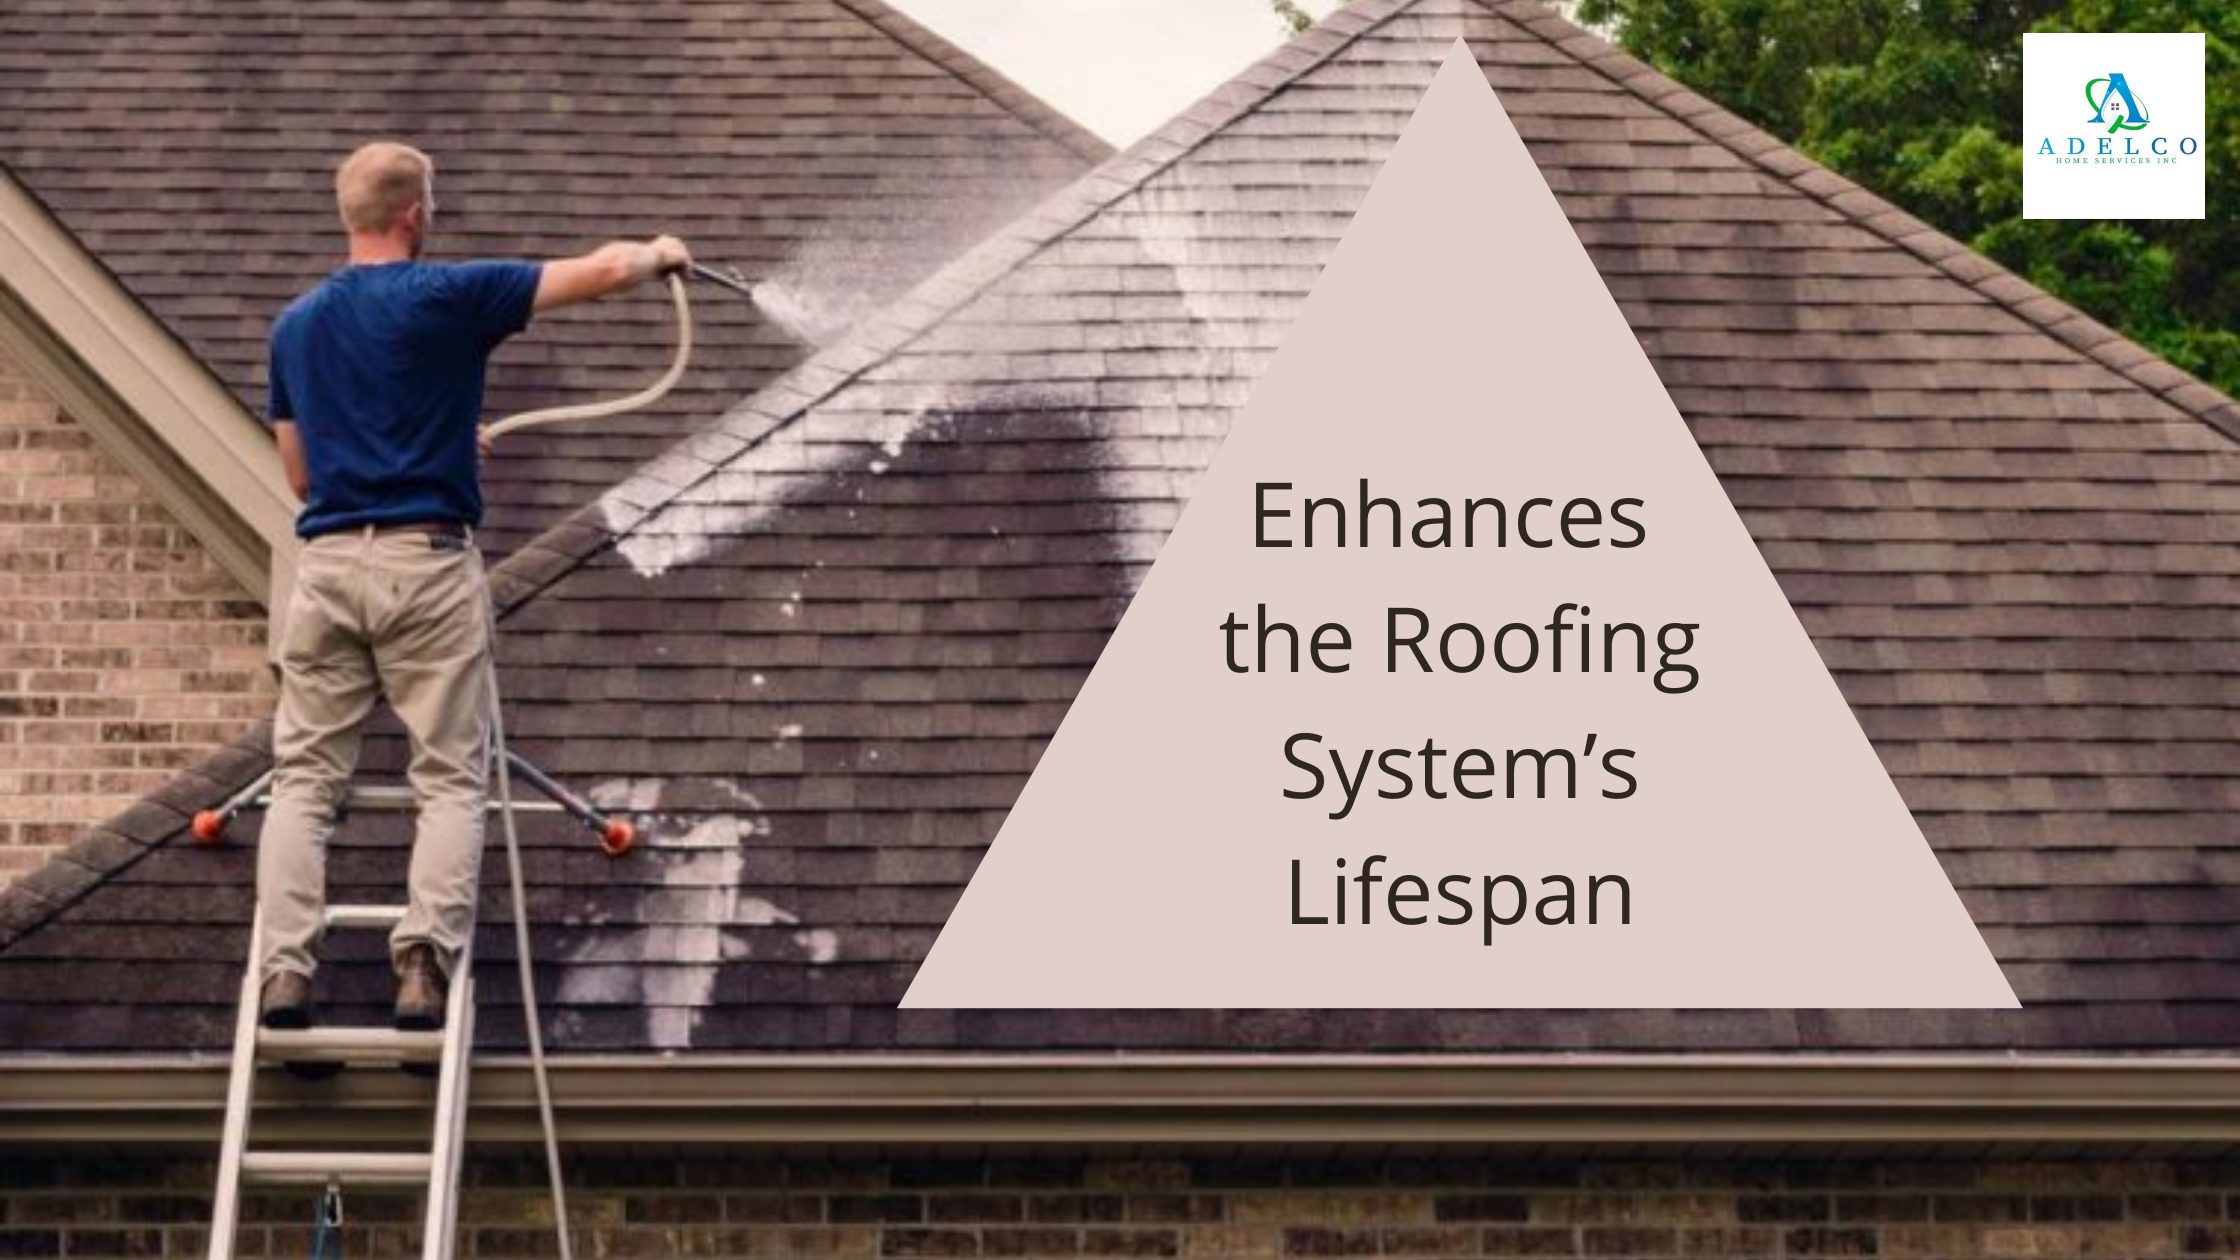 Roof Demossing Enhances the Roofing System’s Lifespan